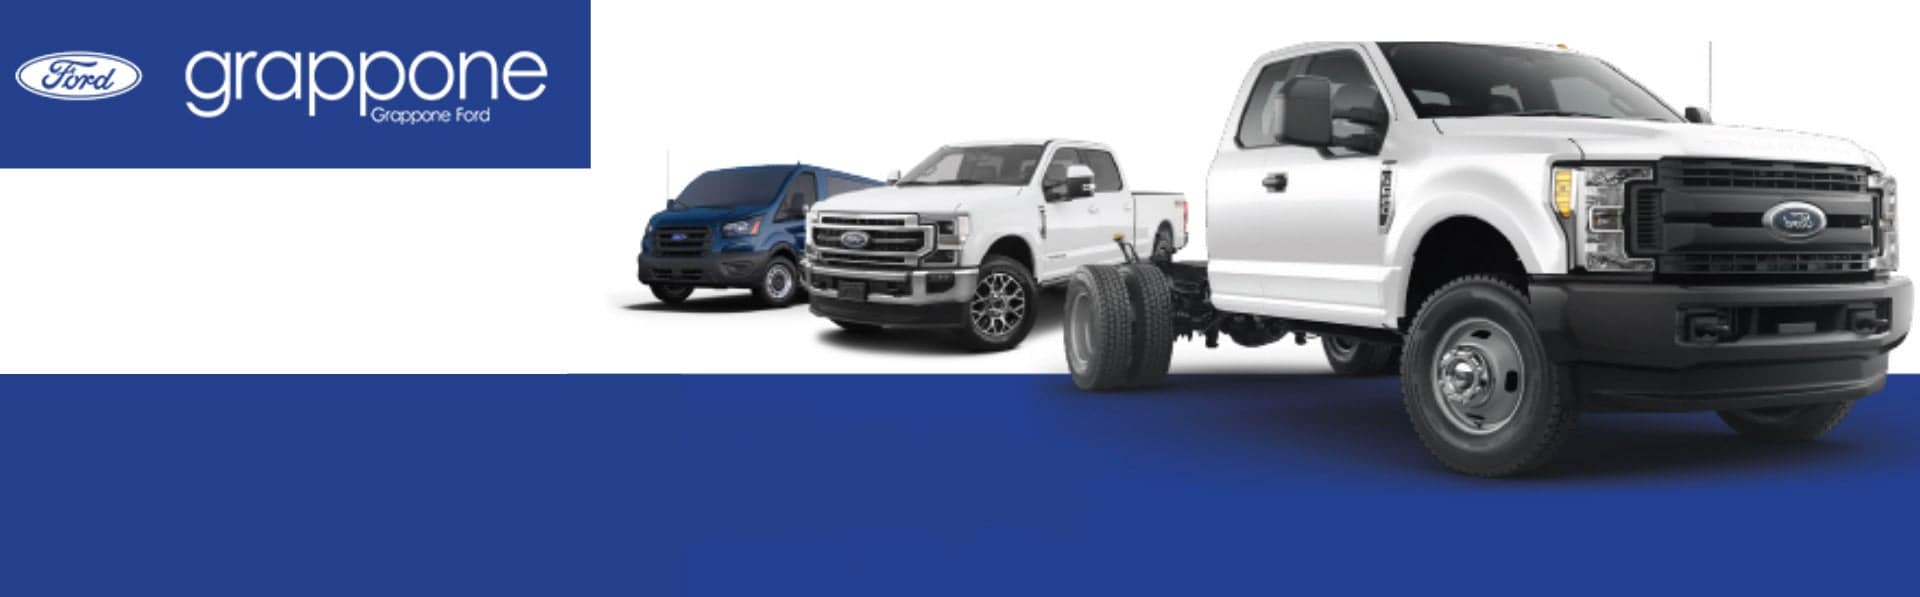 House Ford Mobile Service